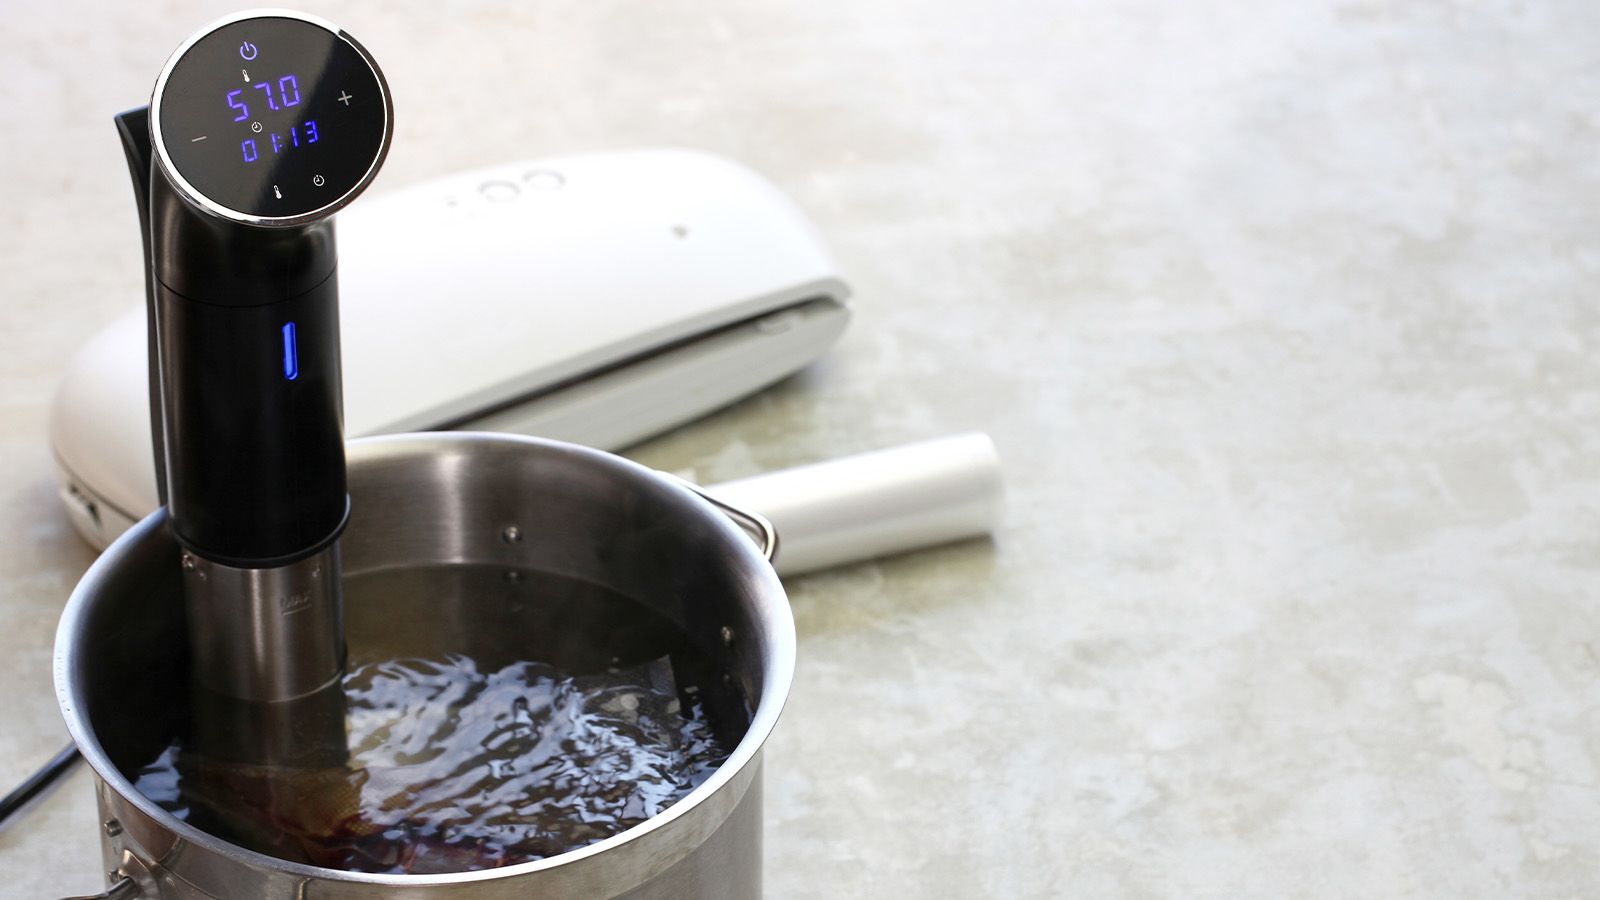 The Best Sous Vide Cookers